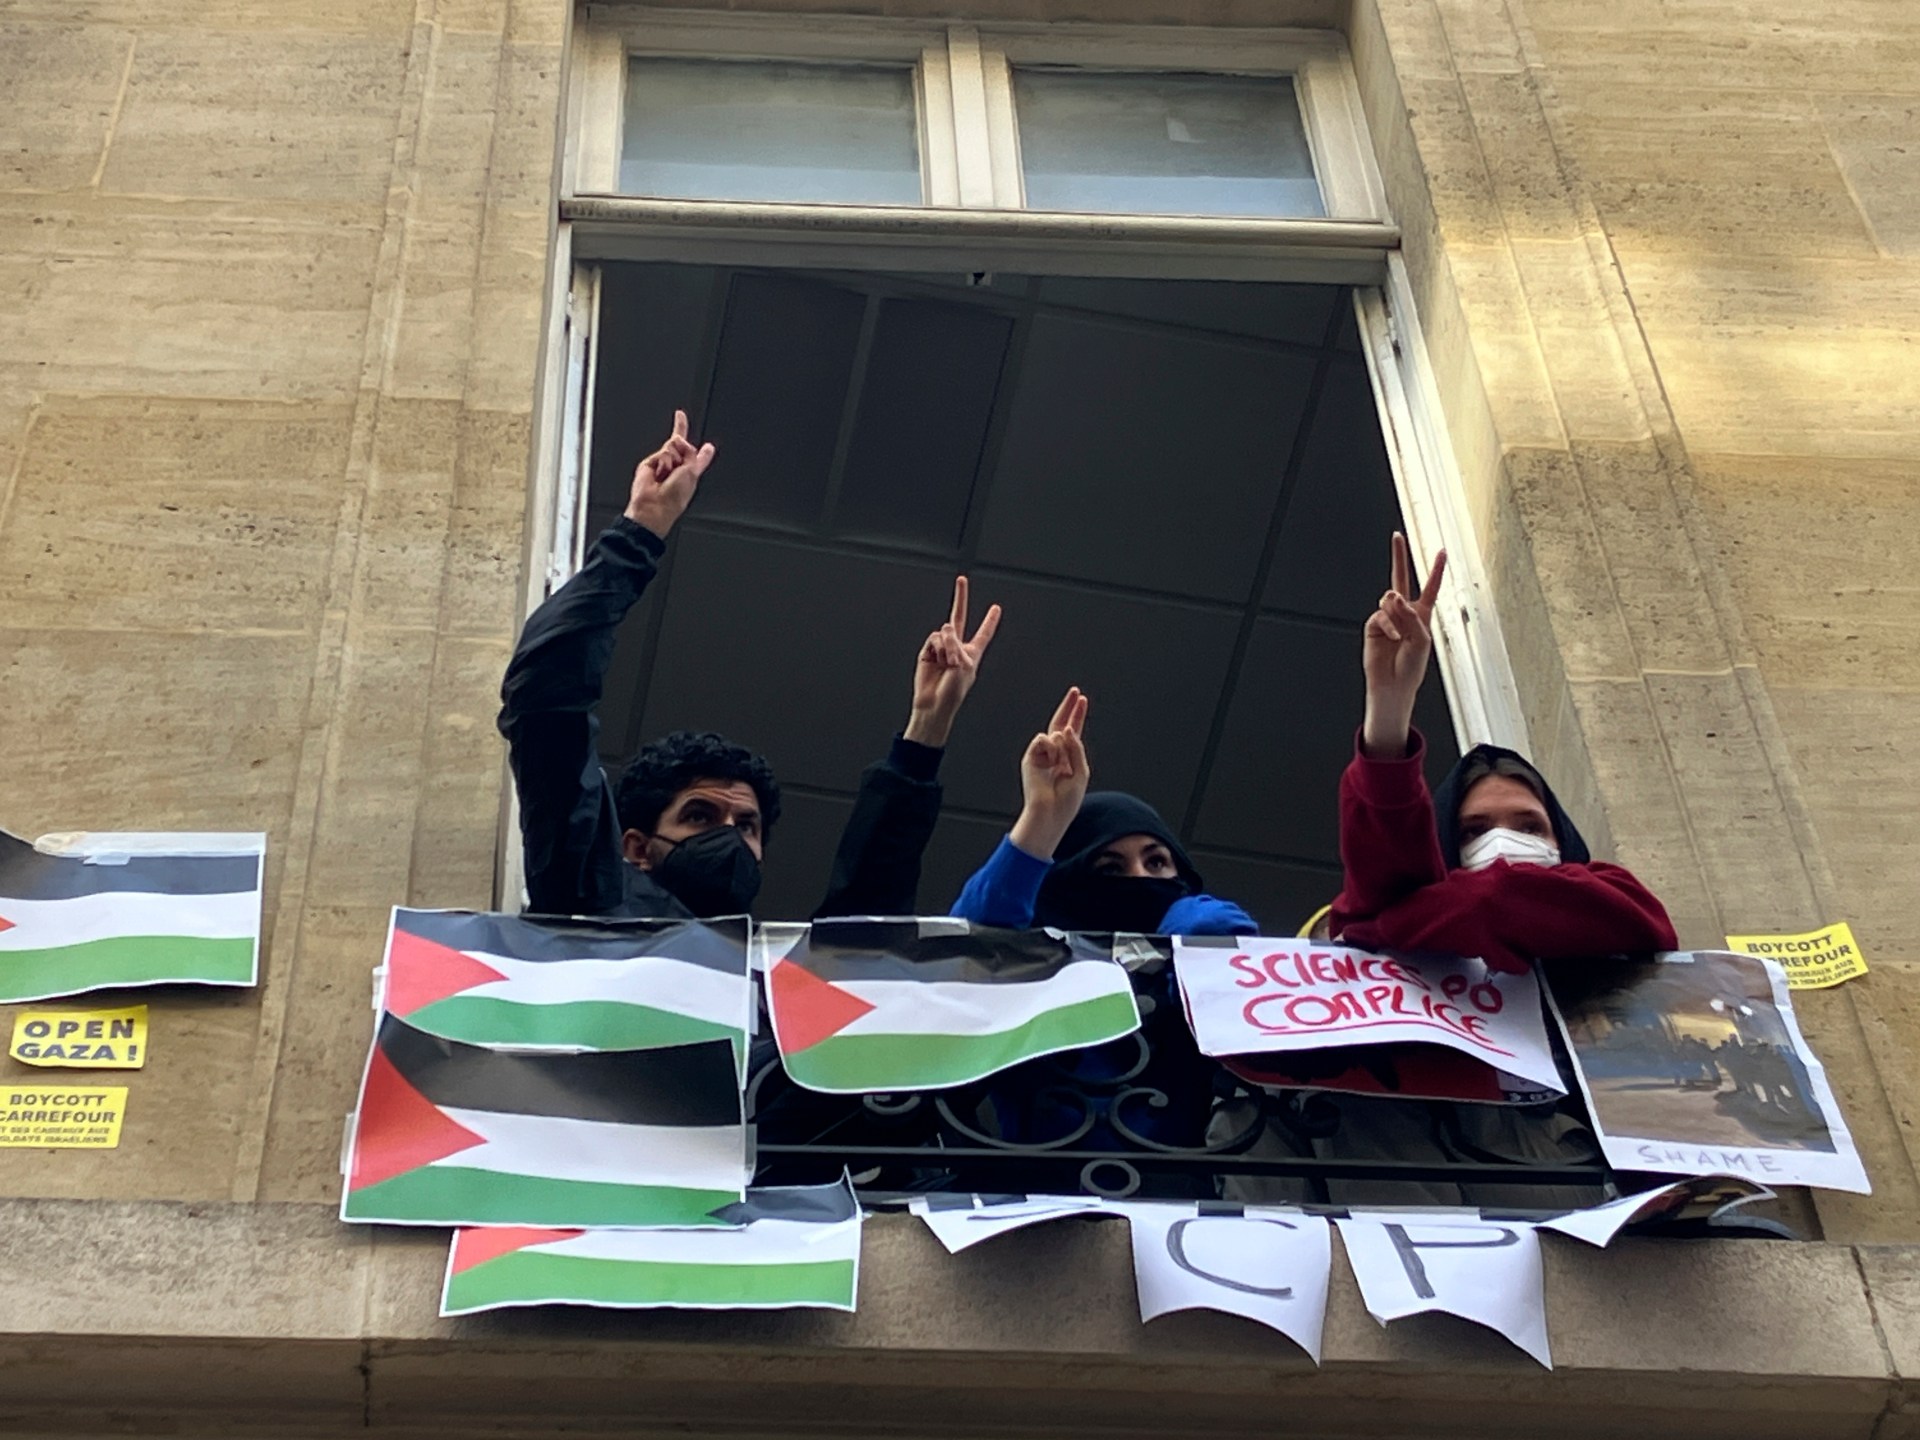 Students at Paris’ Sciences Po Block University in Solidarity with Gaza: Call for University Condemnation of Israel’s Actions